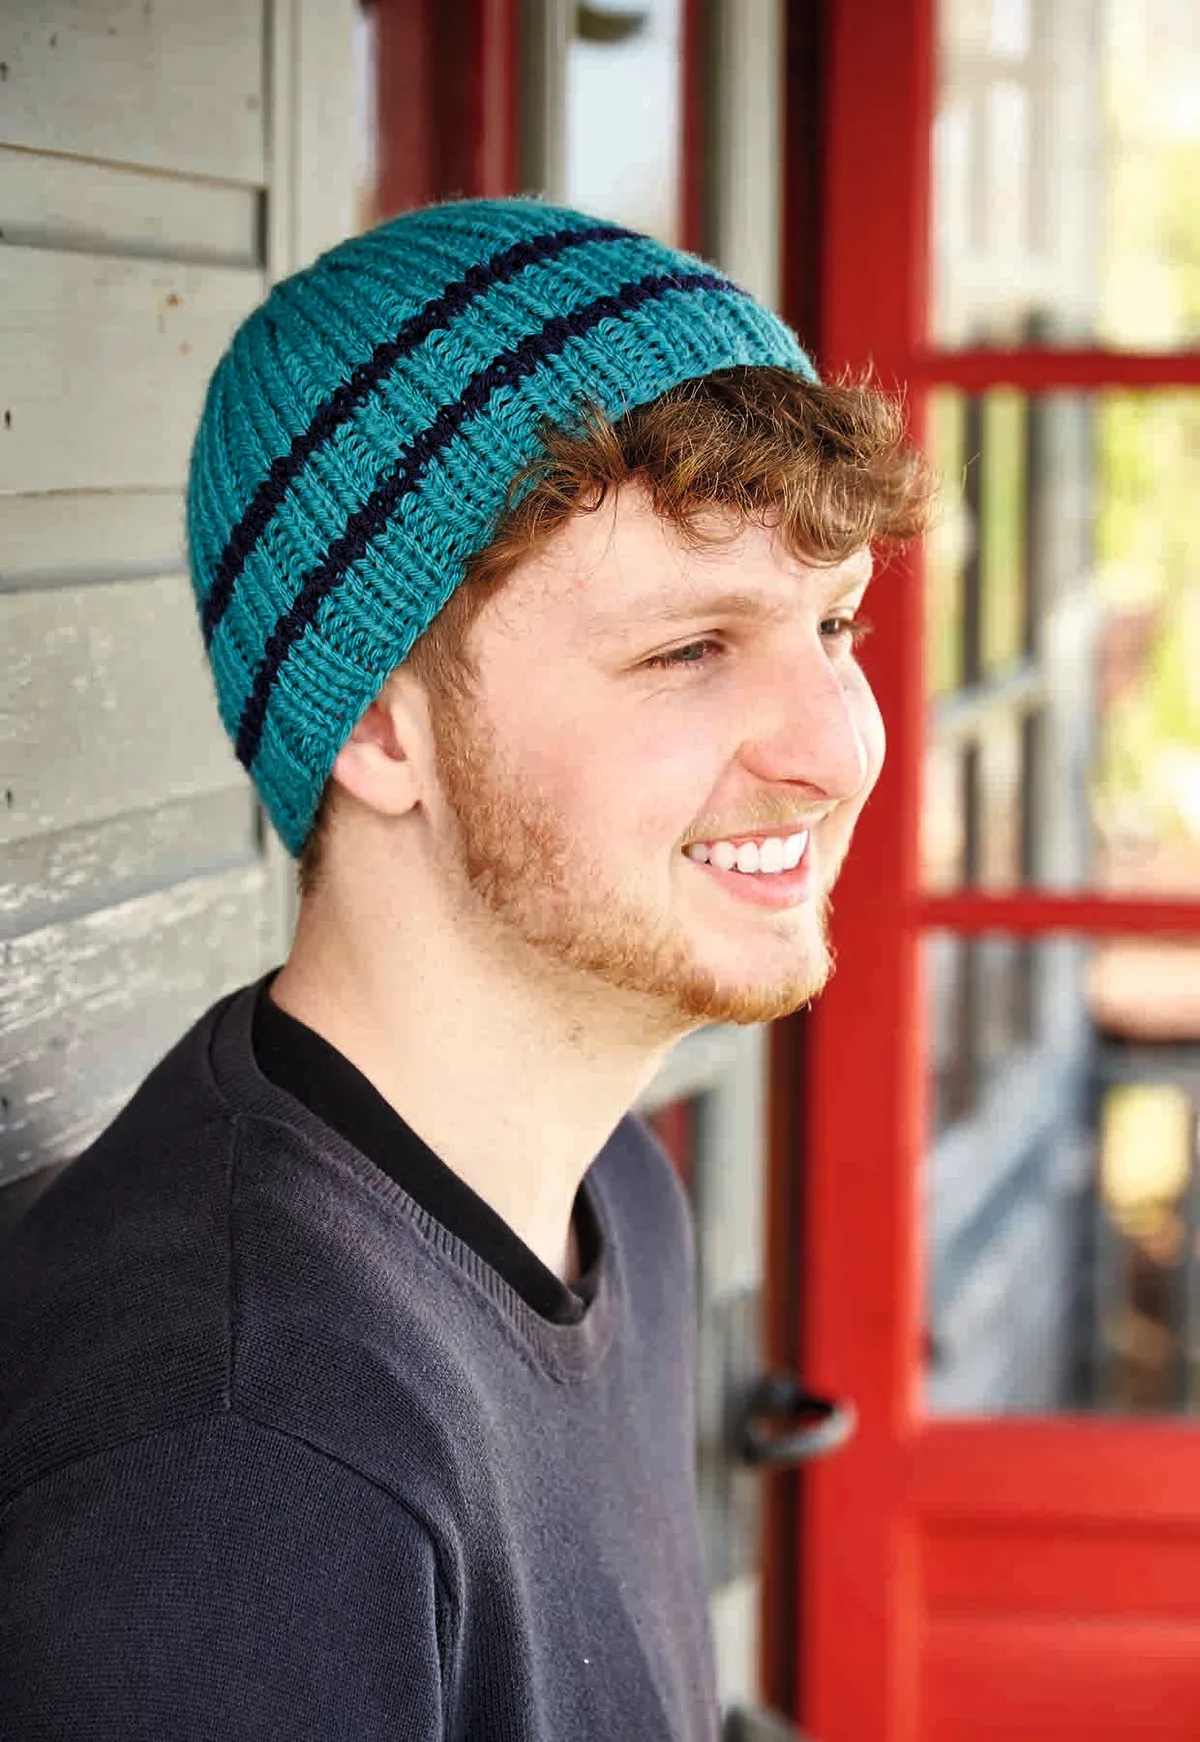 the beanie hat knitting pattern is worn by a young man with red hair and a big smile